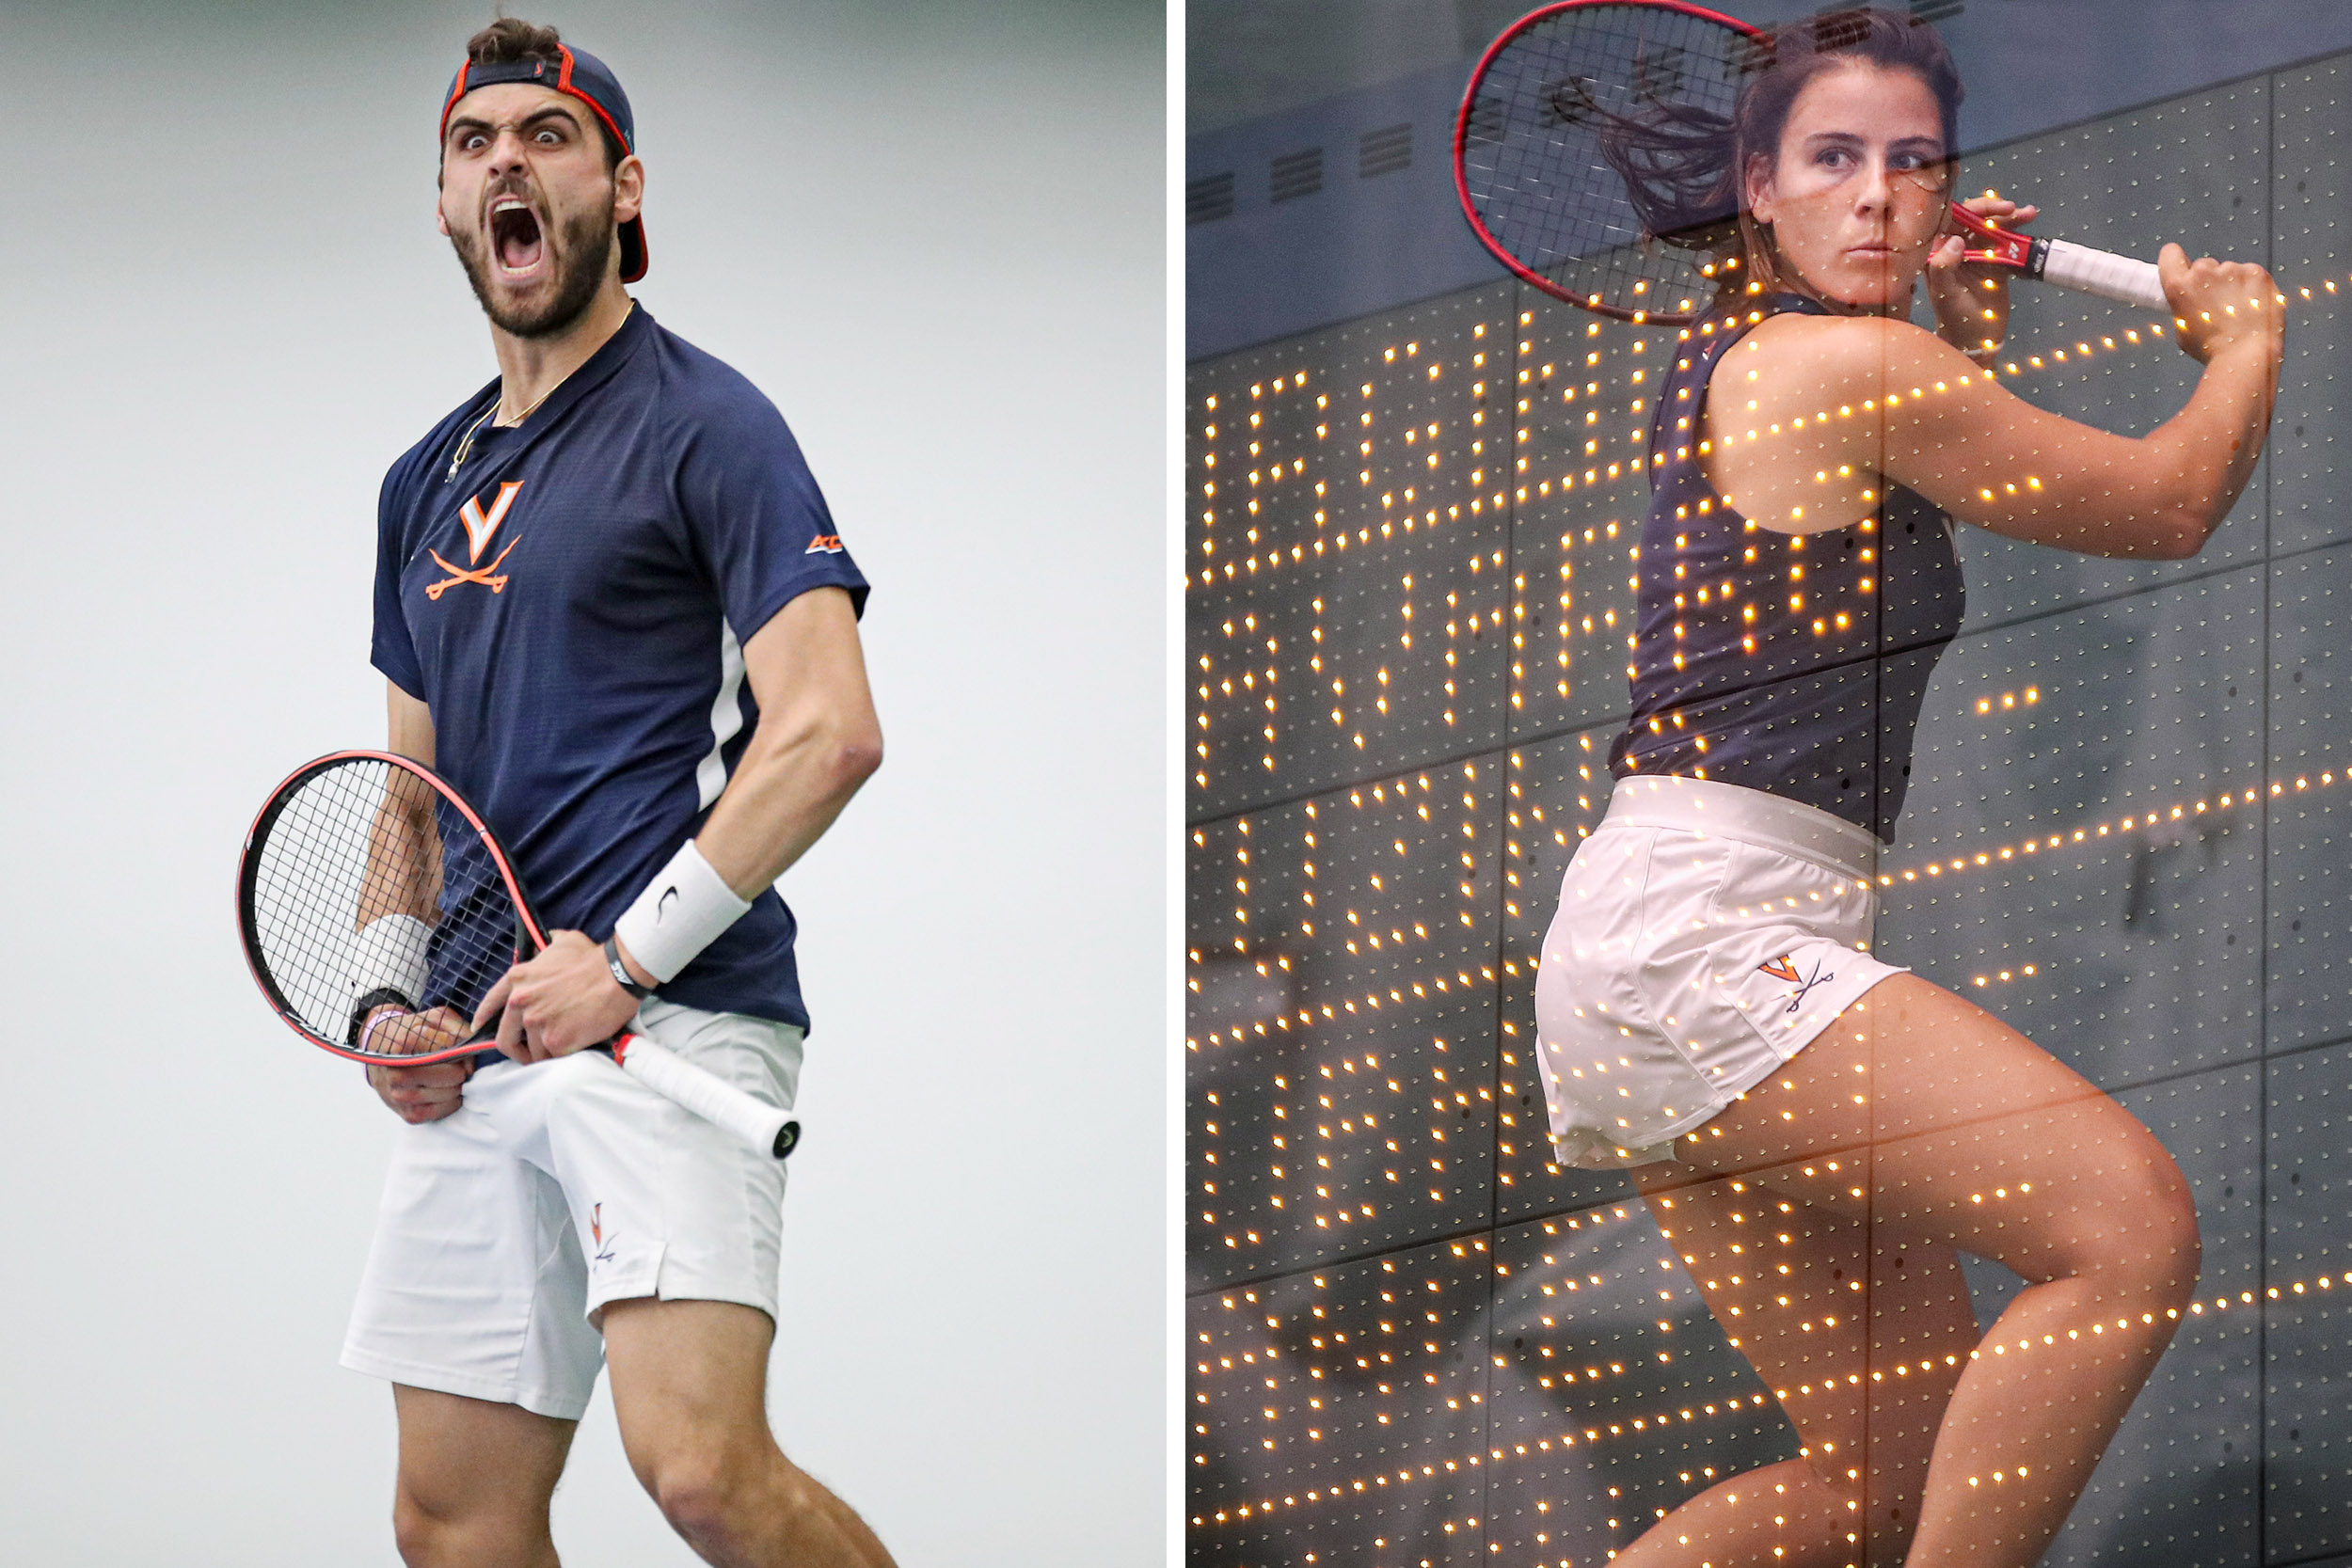 left: man holding tennis racquet yelling, right: woman preparing to swing her tennis racquet to hit a ball.